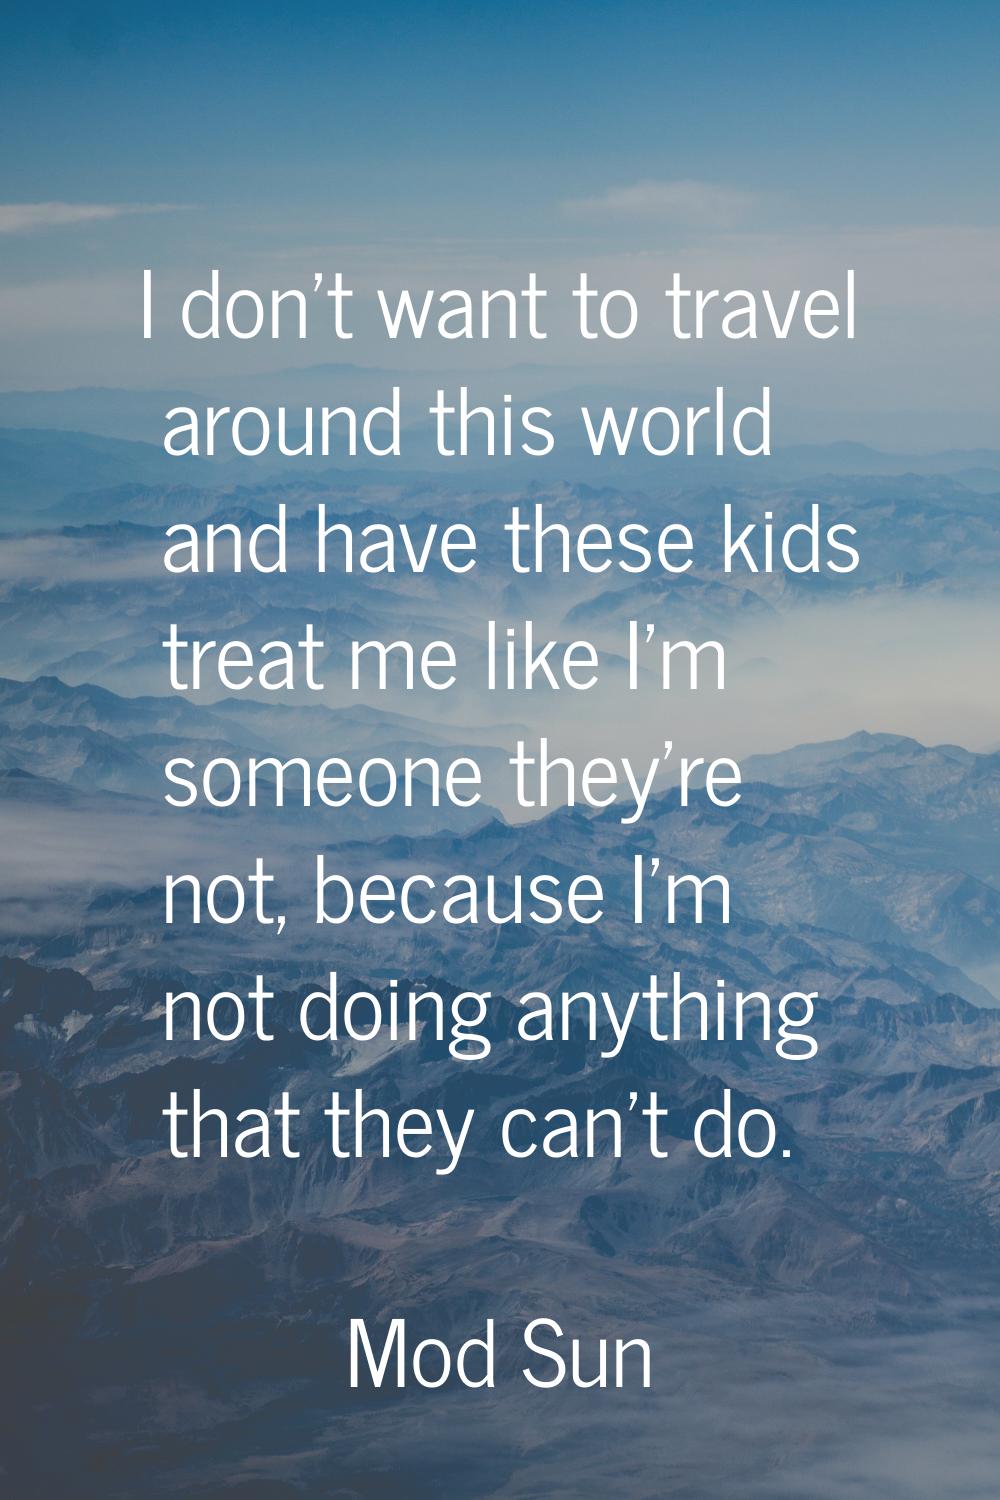 I don't want to travel around this world and have these kids treat me like I'm someone they're not,